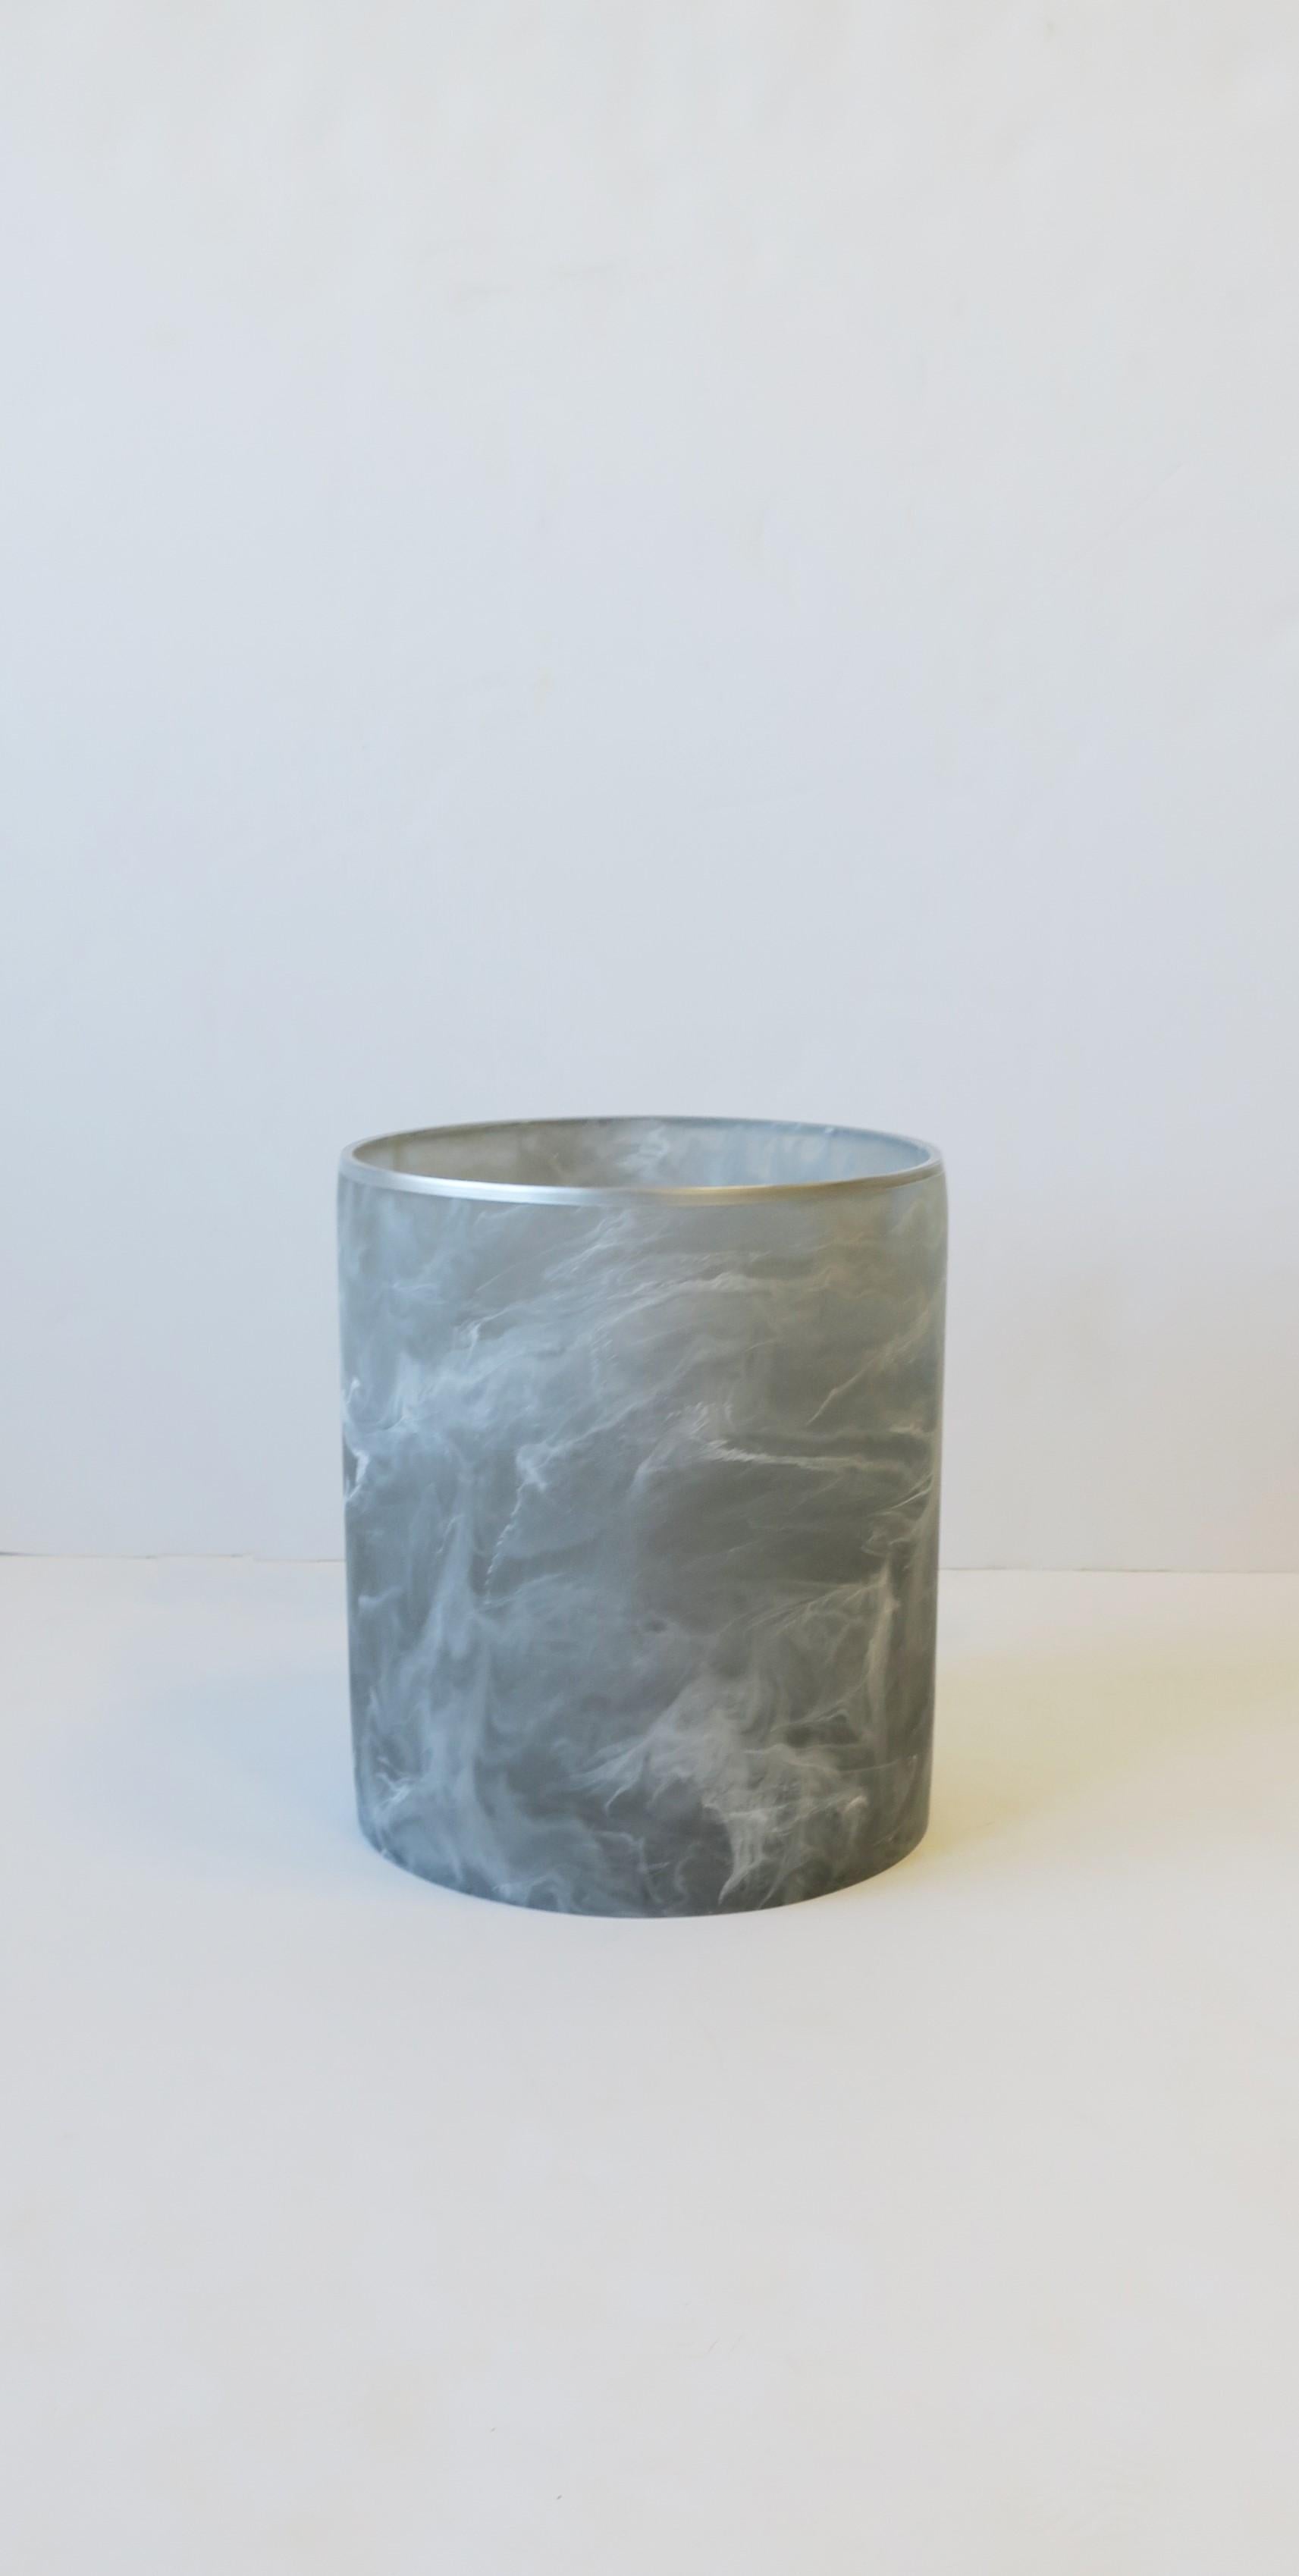 A marble style acrylic wastebasket [waste basket] or trash can in grey and white. Wastebasket is a matte acrylic with a marble-like design. A great piece for a home office, bathroom, walk-in-closet area, etc. Dimensions: 8